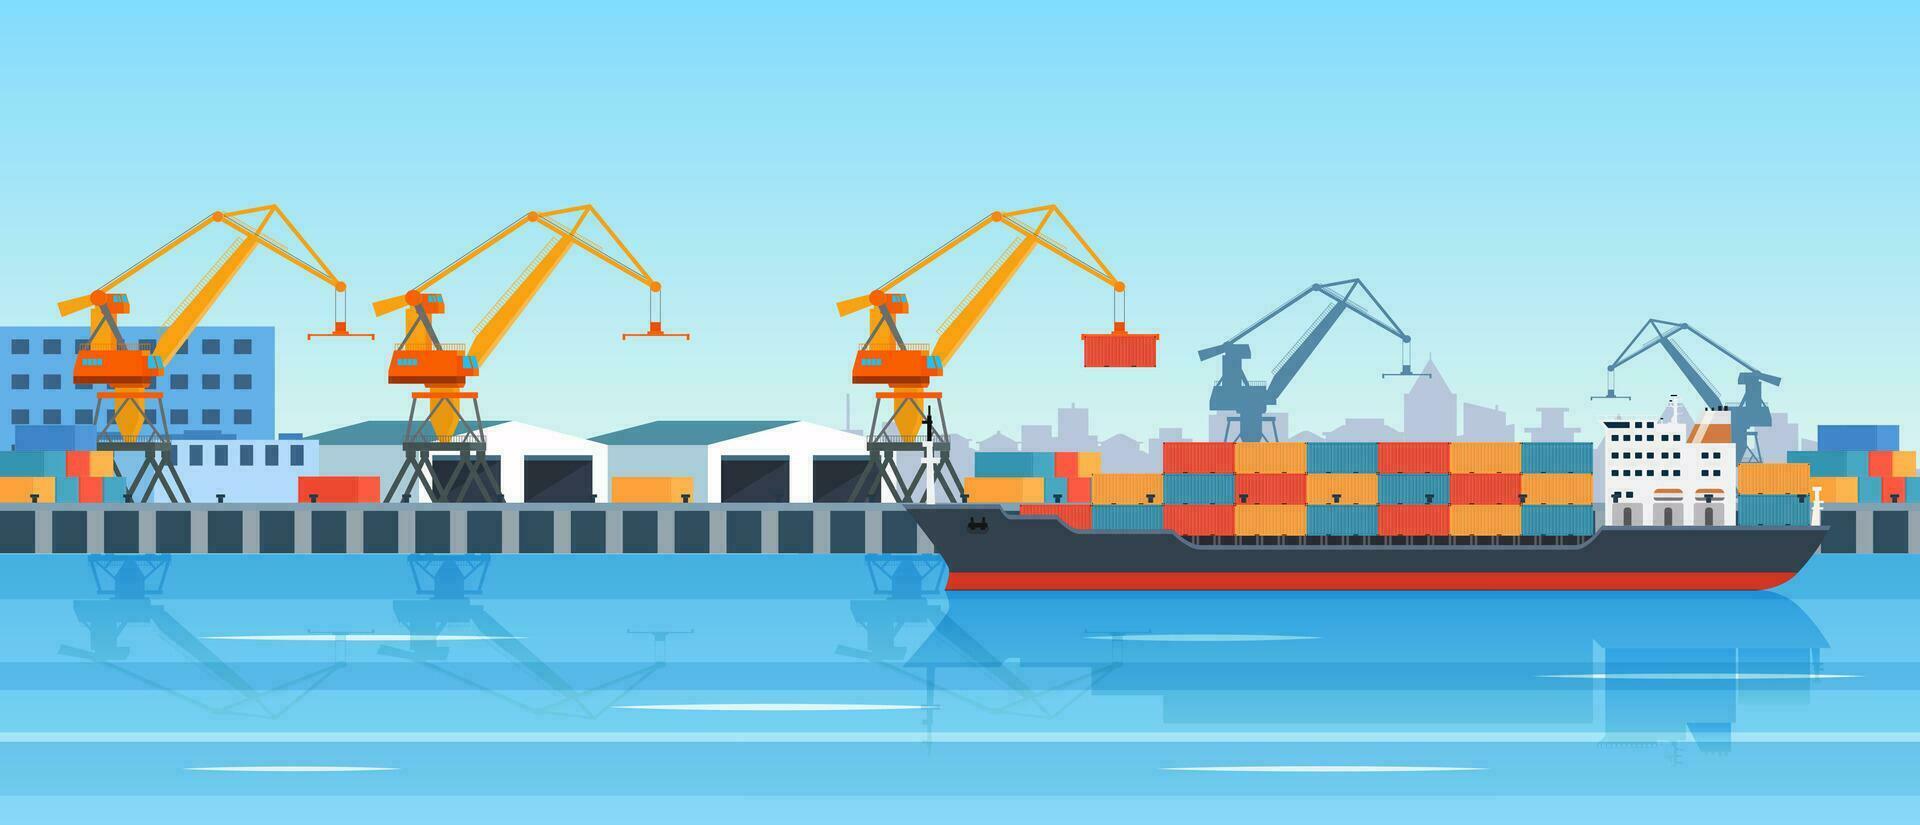 Cargo ship loading in city port. Cranes on dockside, pier unloading shipping containers from freight vessel to shore. Vector illustration in flat style